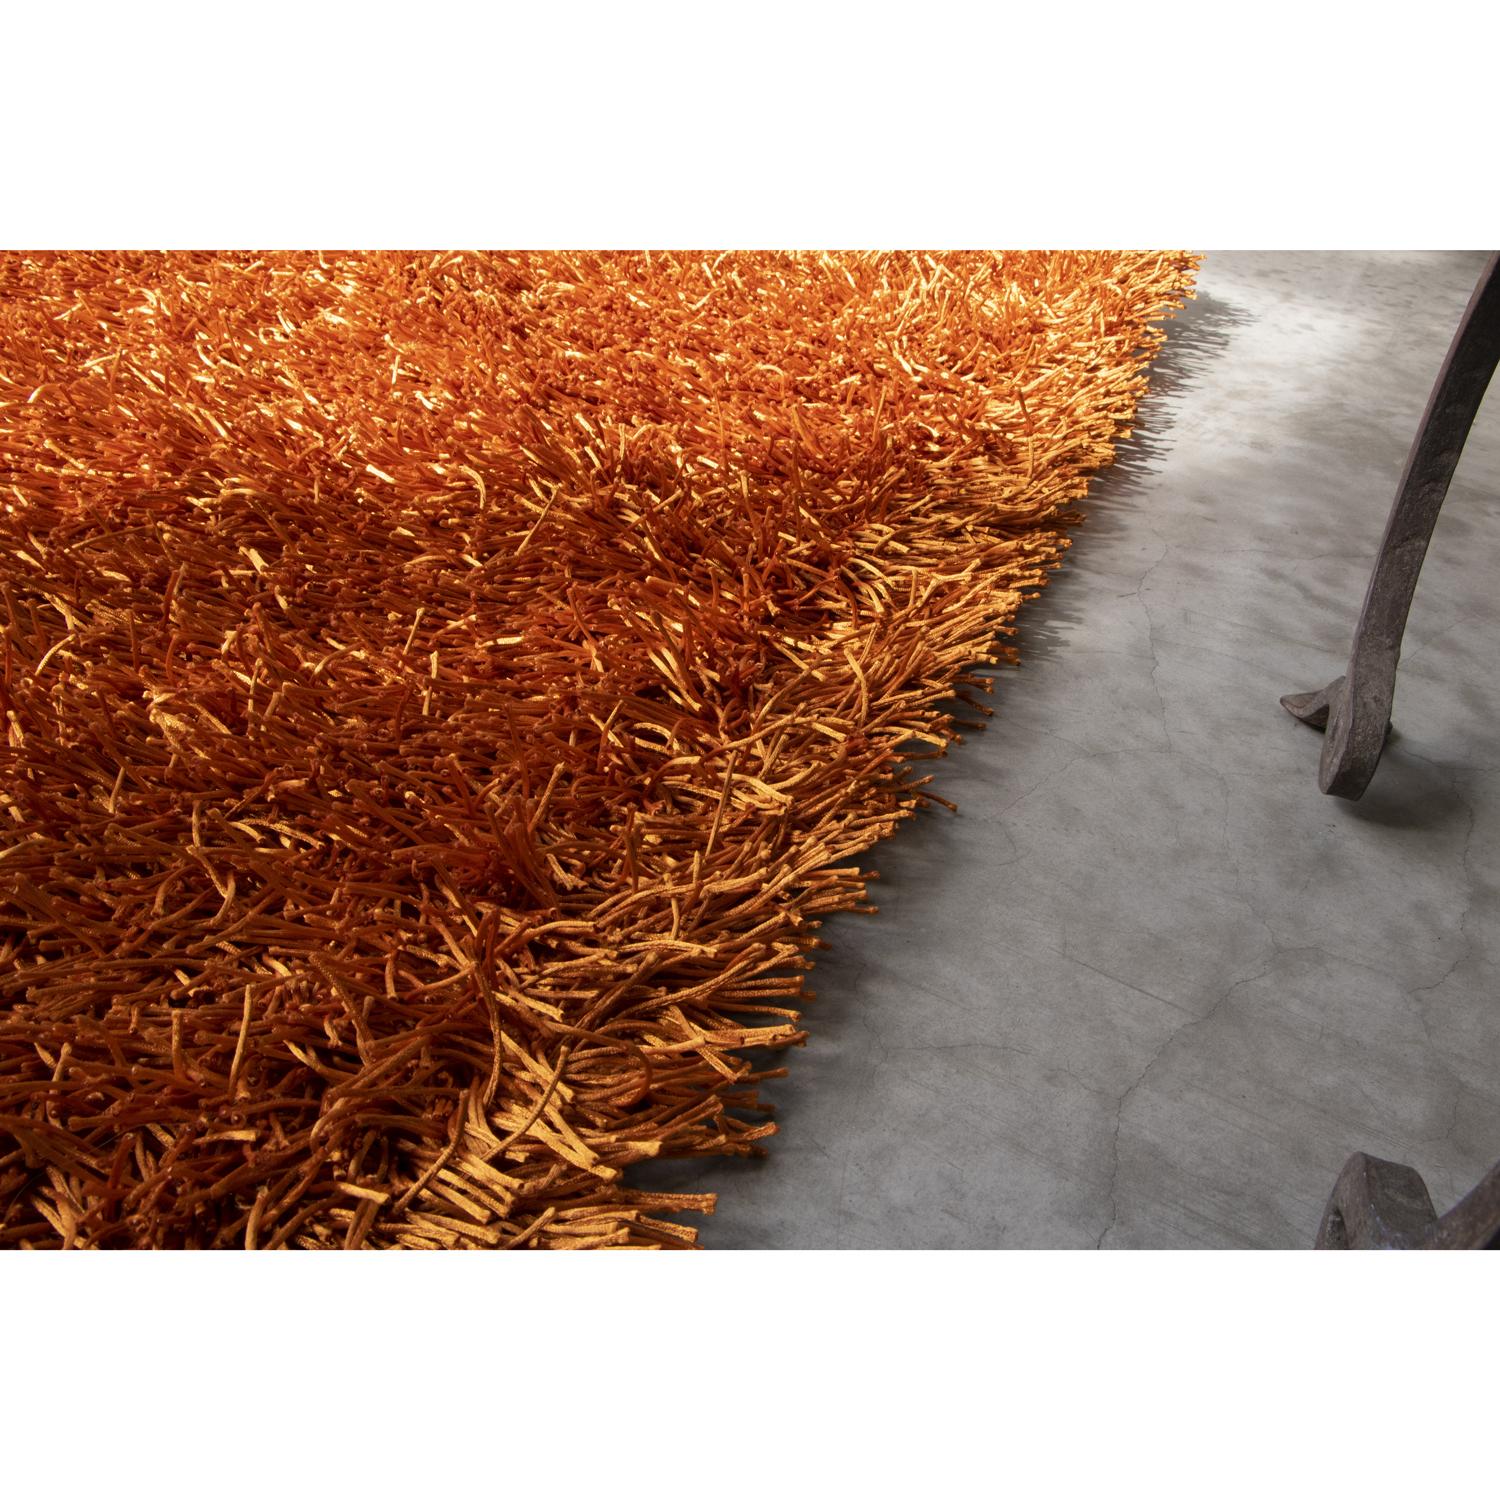 Modern Seasonal Style Spring Orange Rug by Deanna Comellini In Stock 170x240 cm For Sale